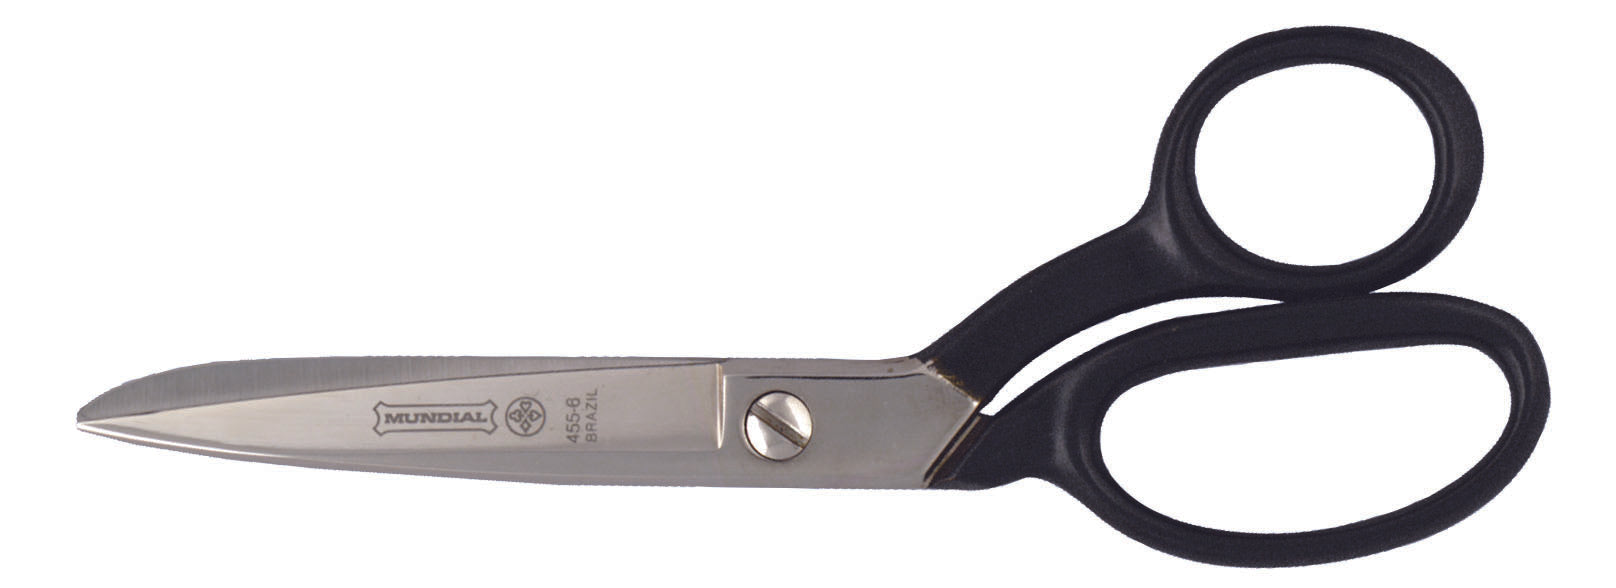 Mundial 6" All Metal Bent Shear with a Coated Handle